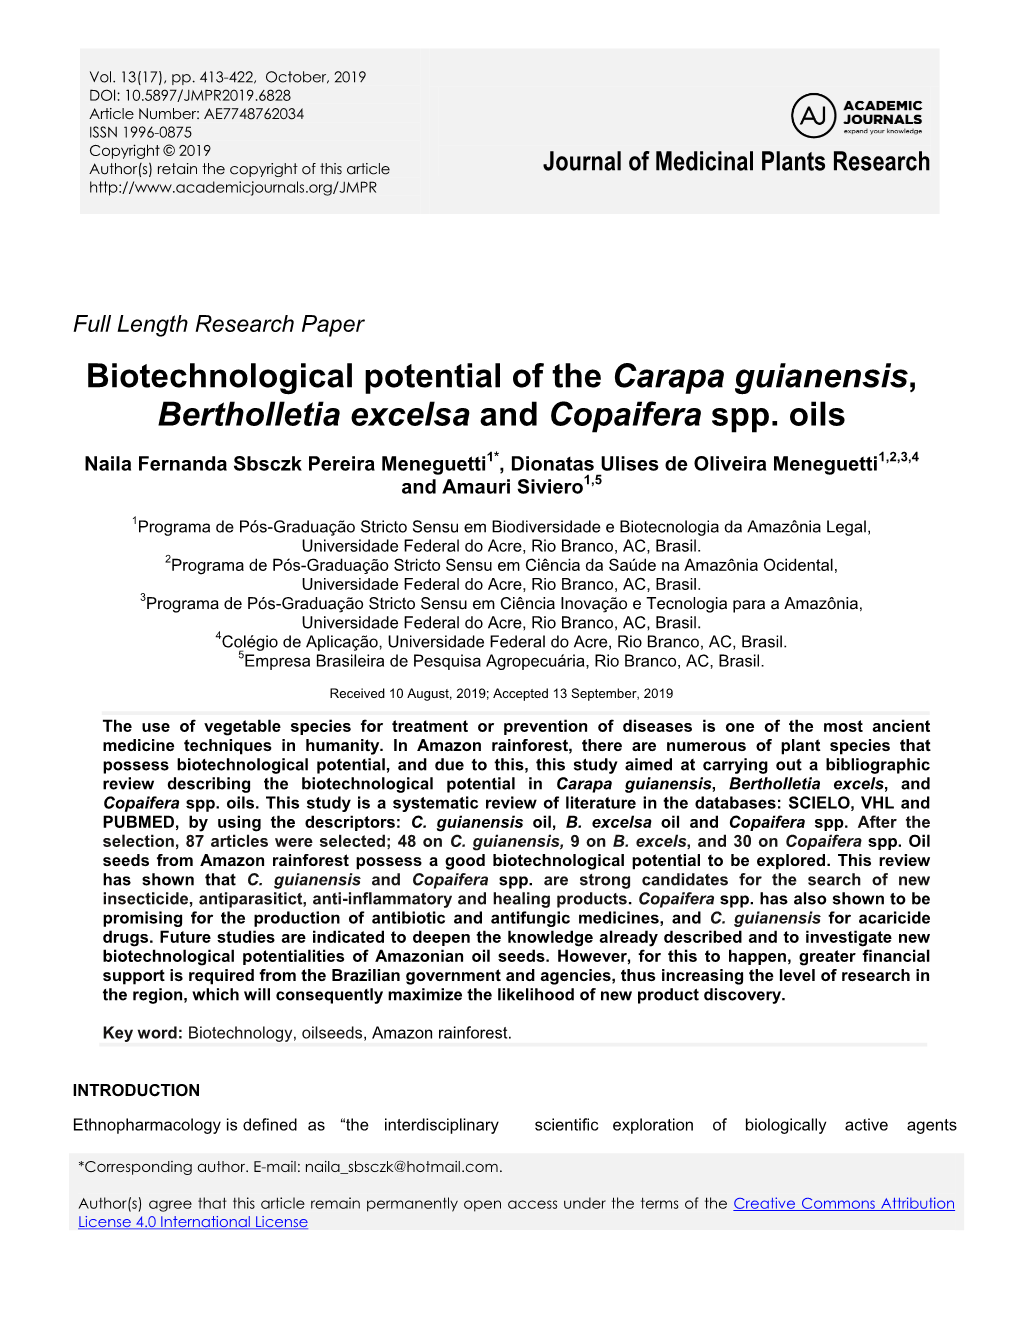 Biotechnological Potential of the Carapa Guianensis, Bertholletia Excelsa and Copaifera Spp. Oils